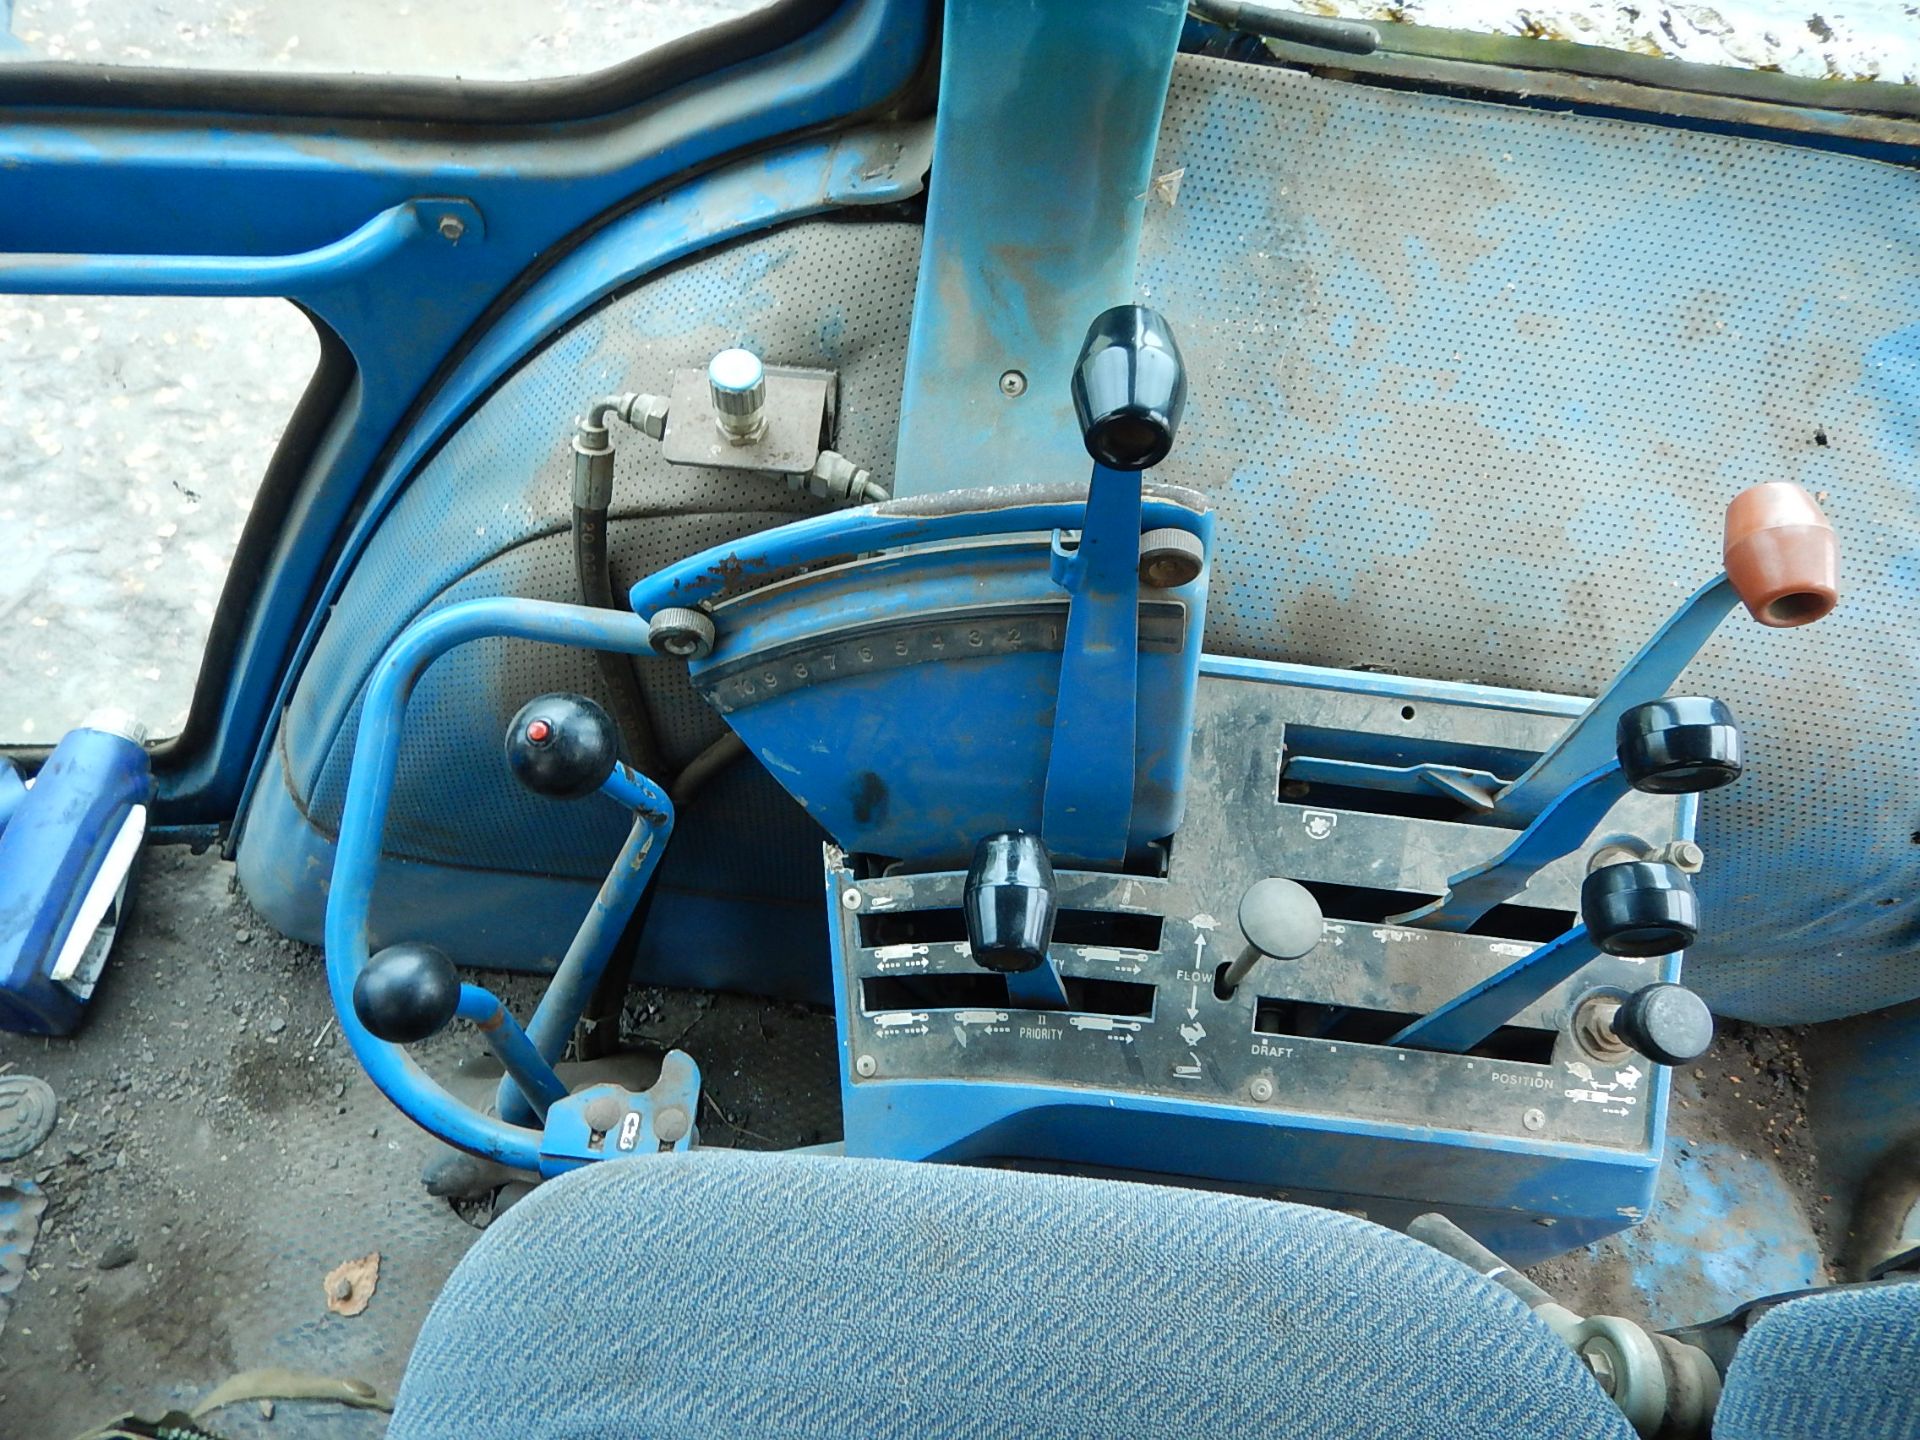 1985 FORD TW-25 4wd TRACTOR Fitted with front underslung weight, rear inside wheel weights, Q cab - Image 4 of 12